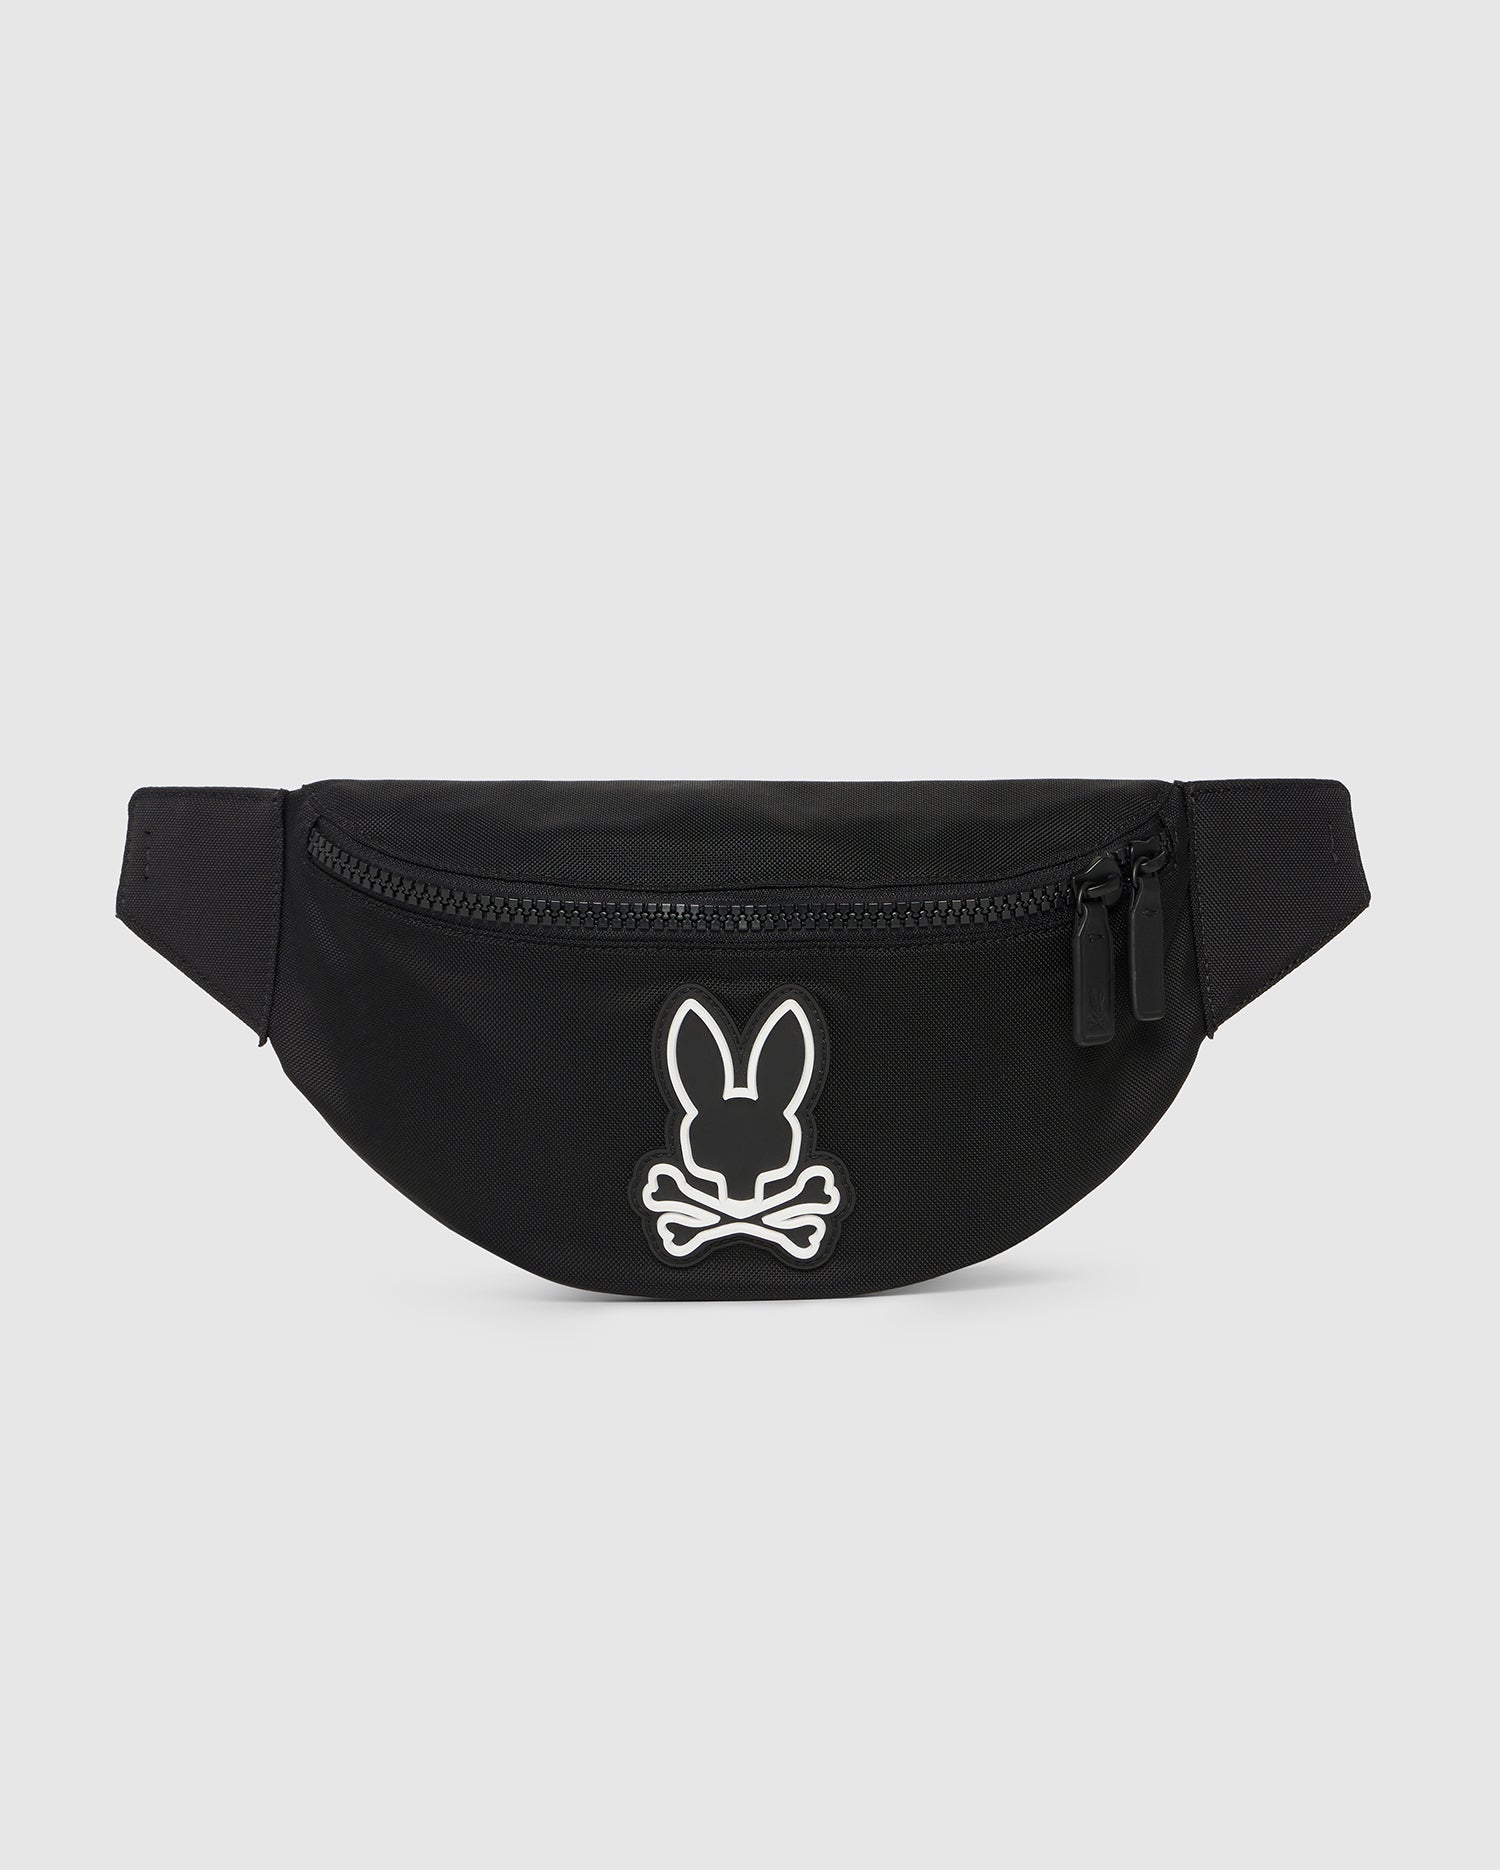 A black canvas Psycho Bunny hip bag with a white bunny logo embroidered on the front, featuring a main zippered compartment and an adjustable strap. The background is plain white.